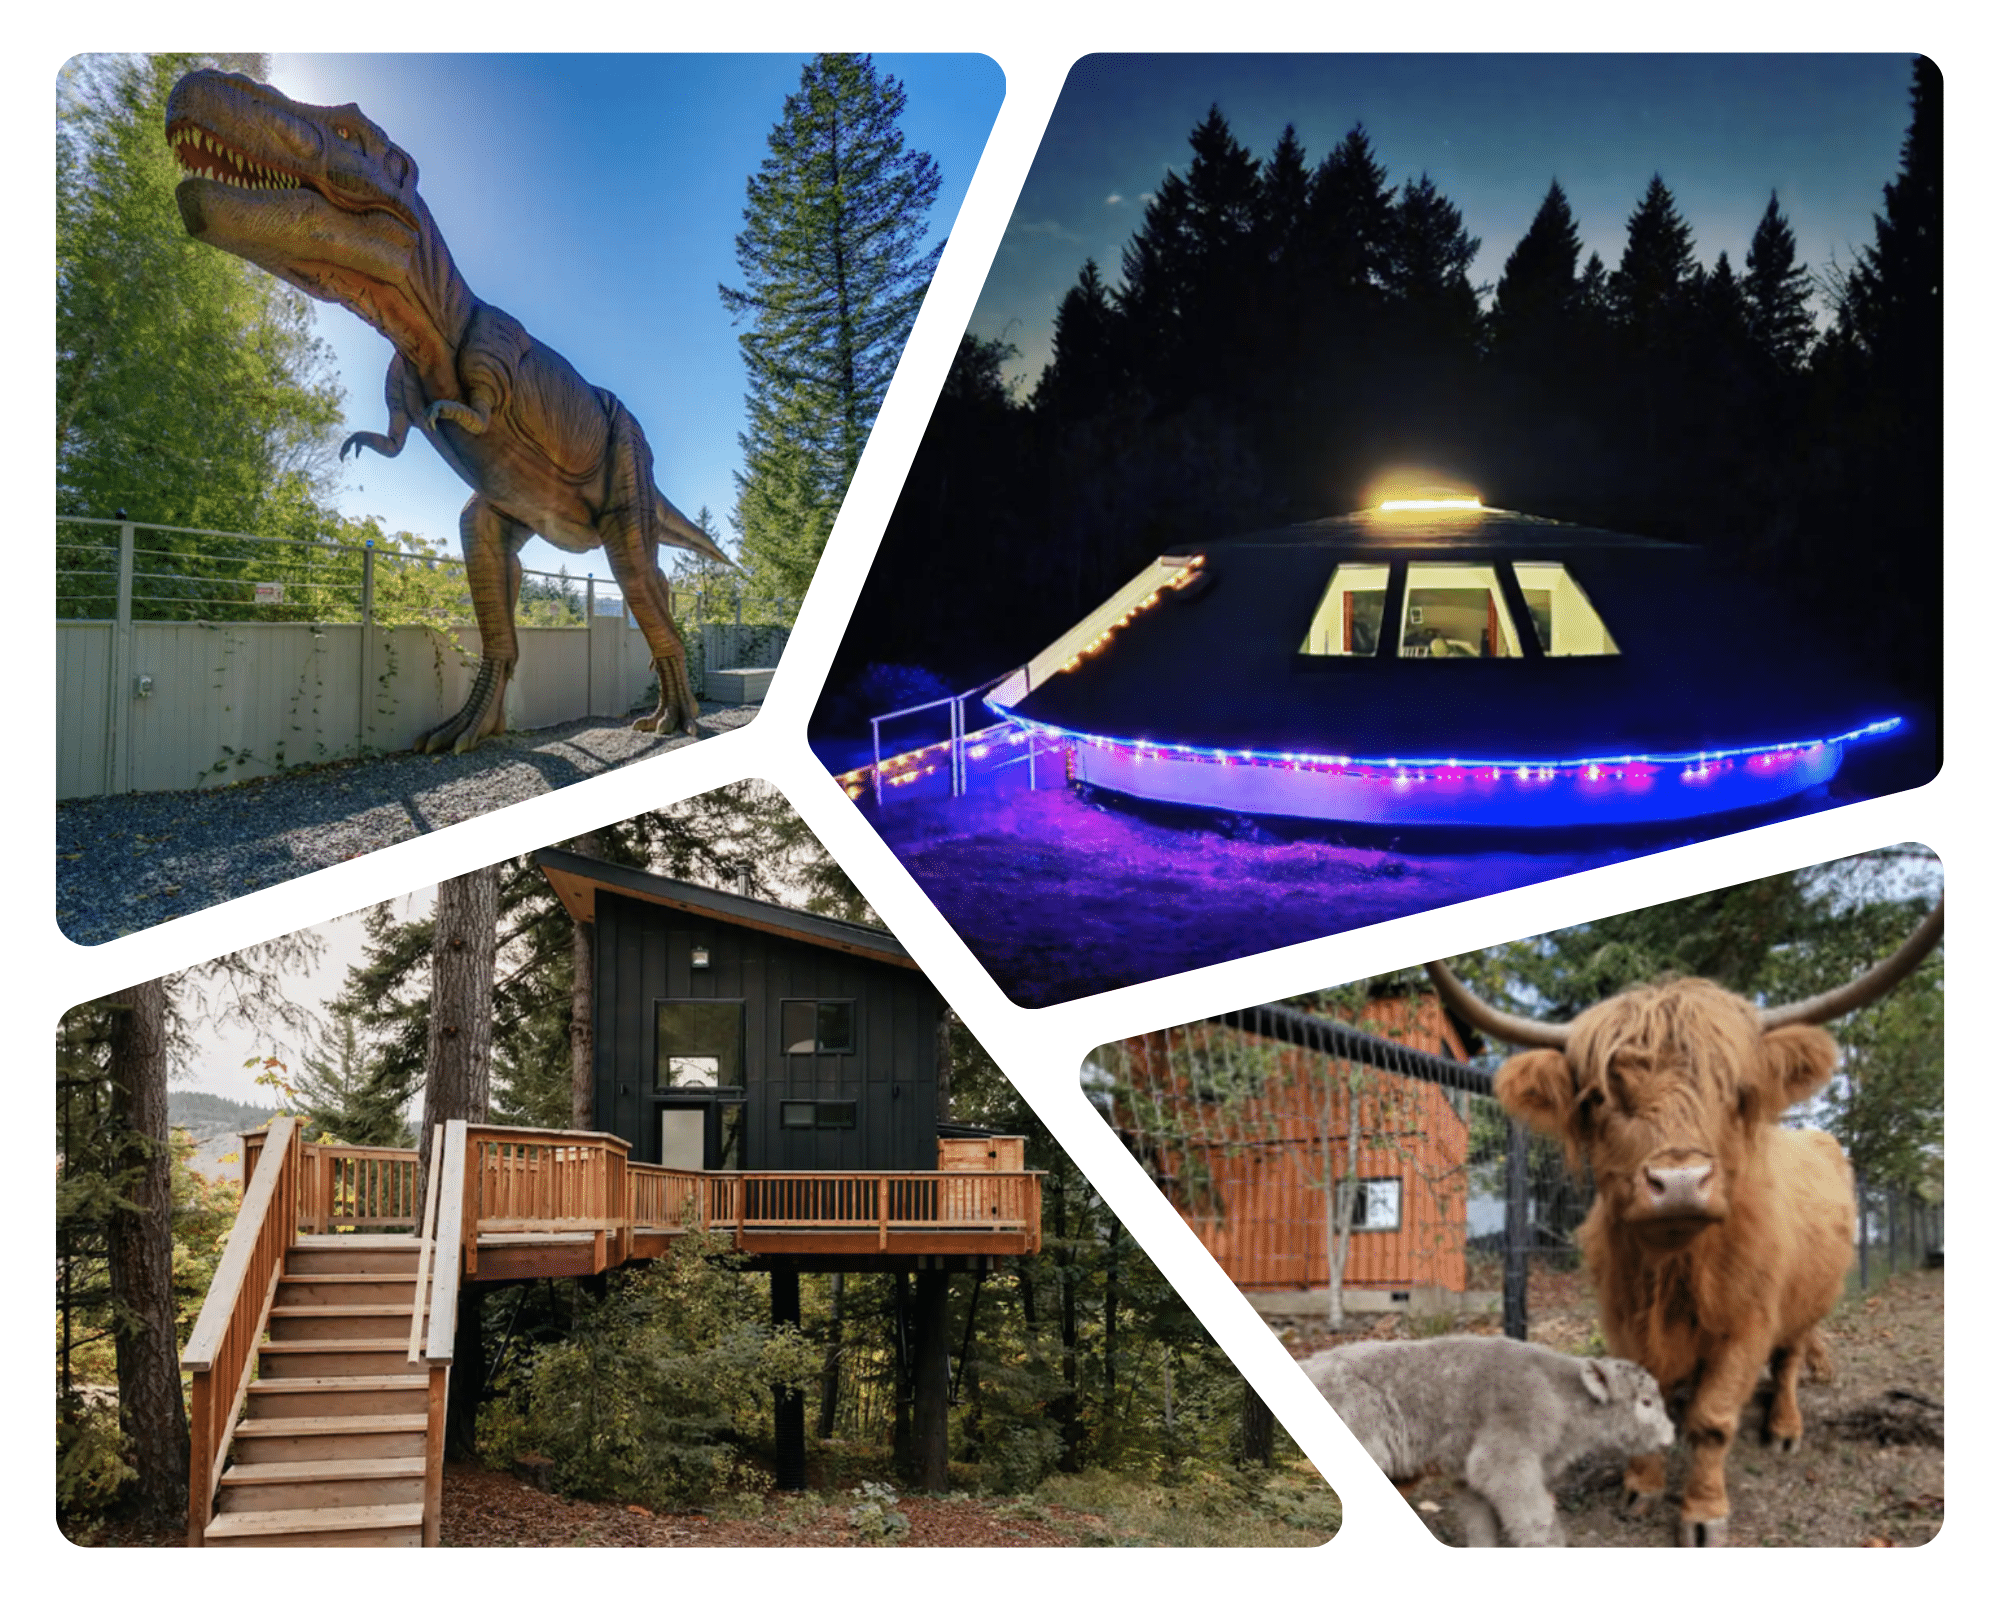 4 photos of unique vacation homes in Southwest Washington